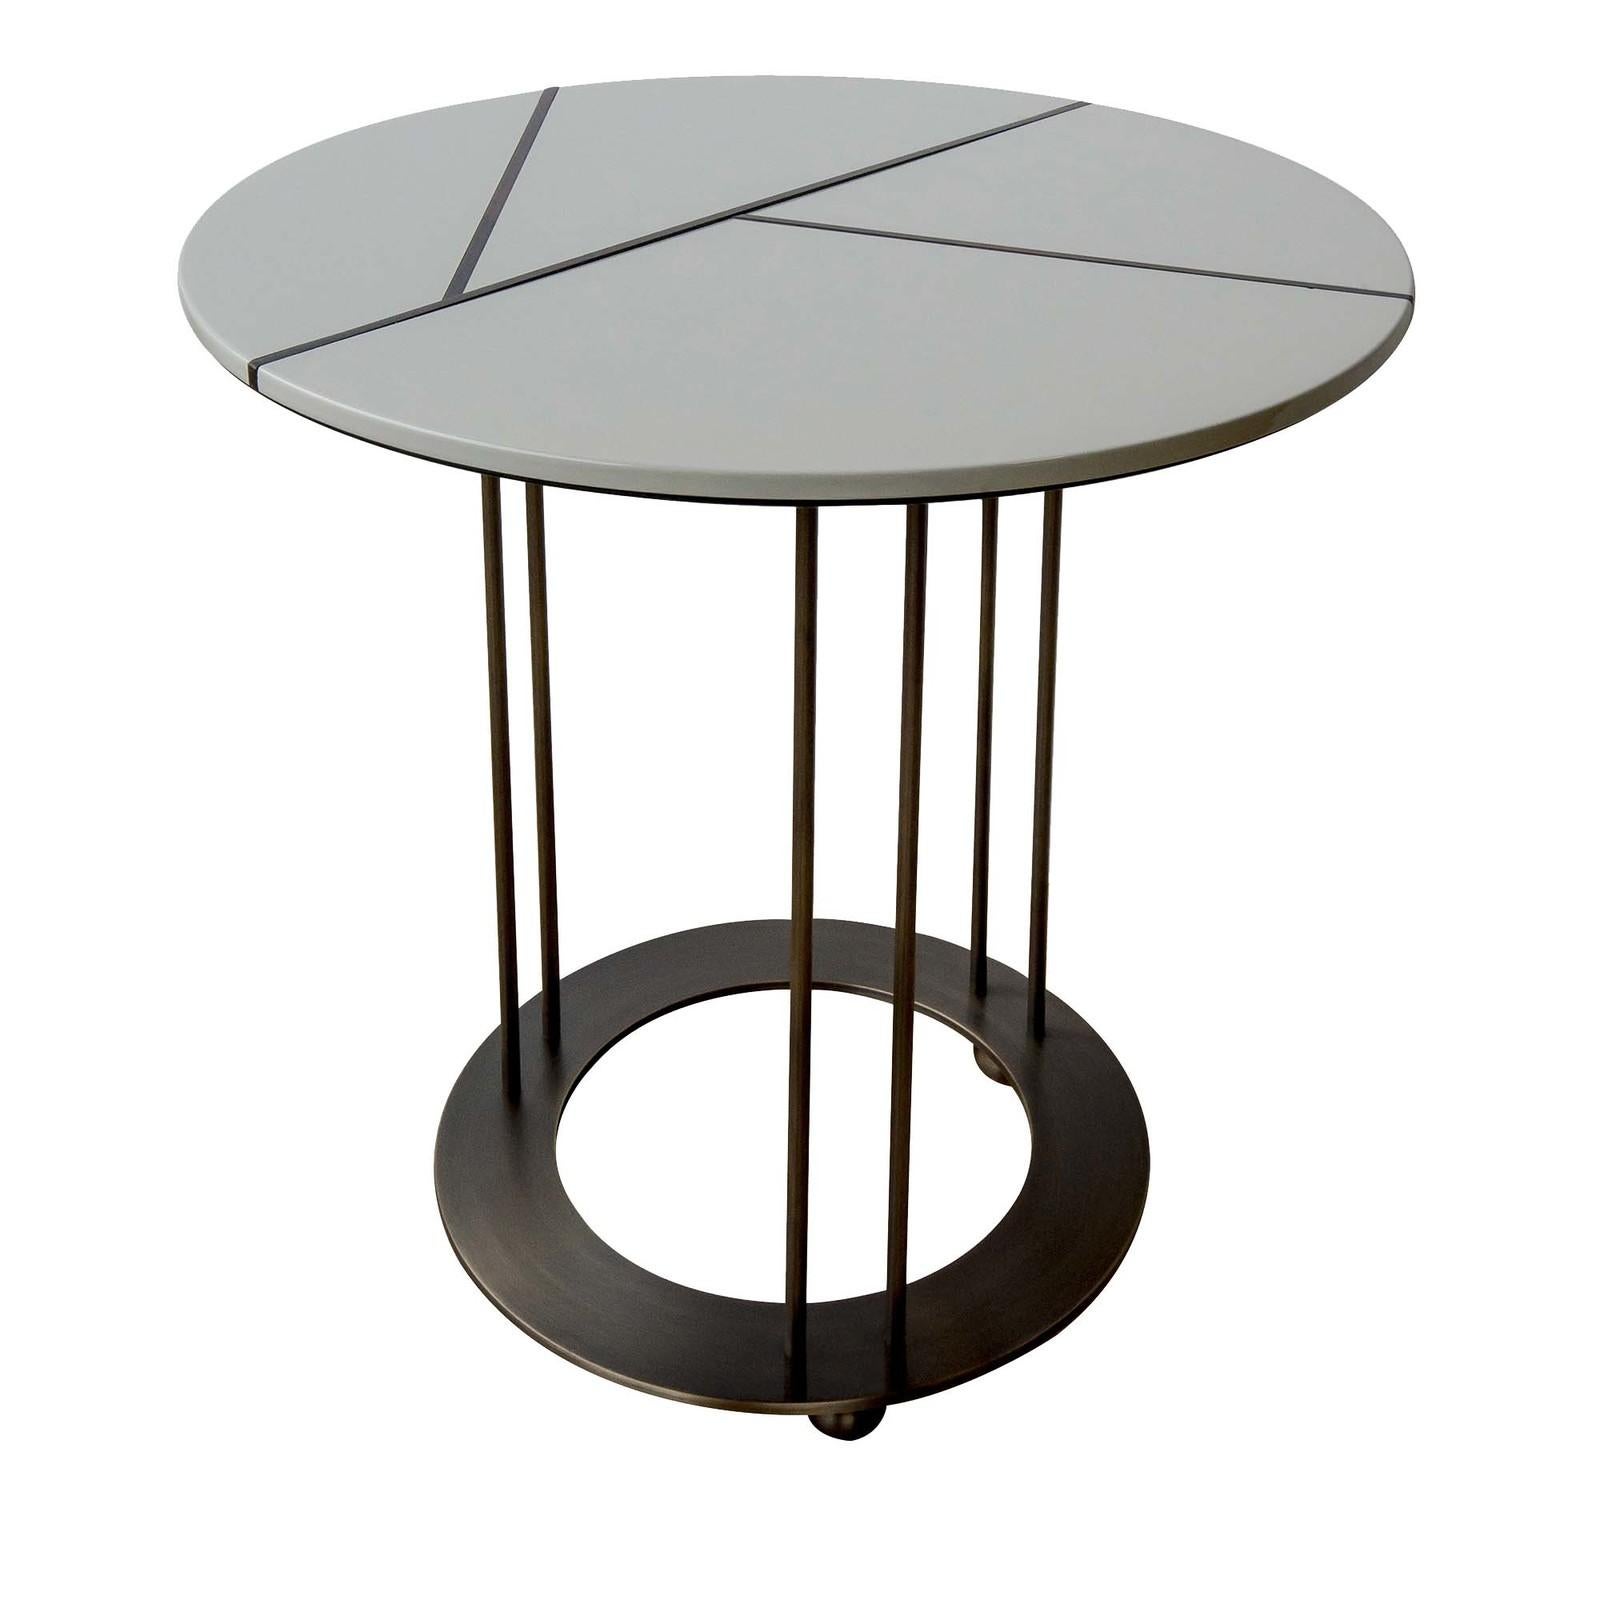 Stunning in its simplicity, this superb side table is defined by meticulous details. The round wooden top has a celadon-hued glossy polyurethane lacquer with a geometric inlay pattern in ebony slats. The angularity of the inlay balances the open